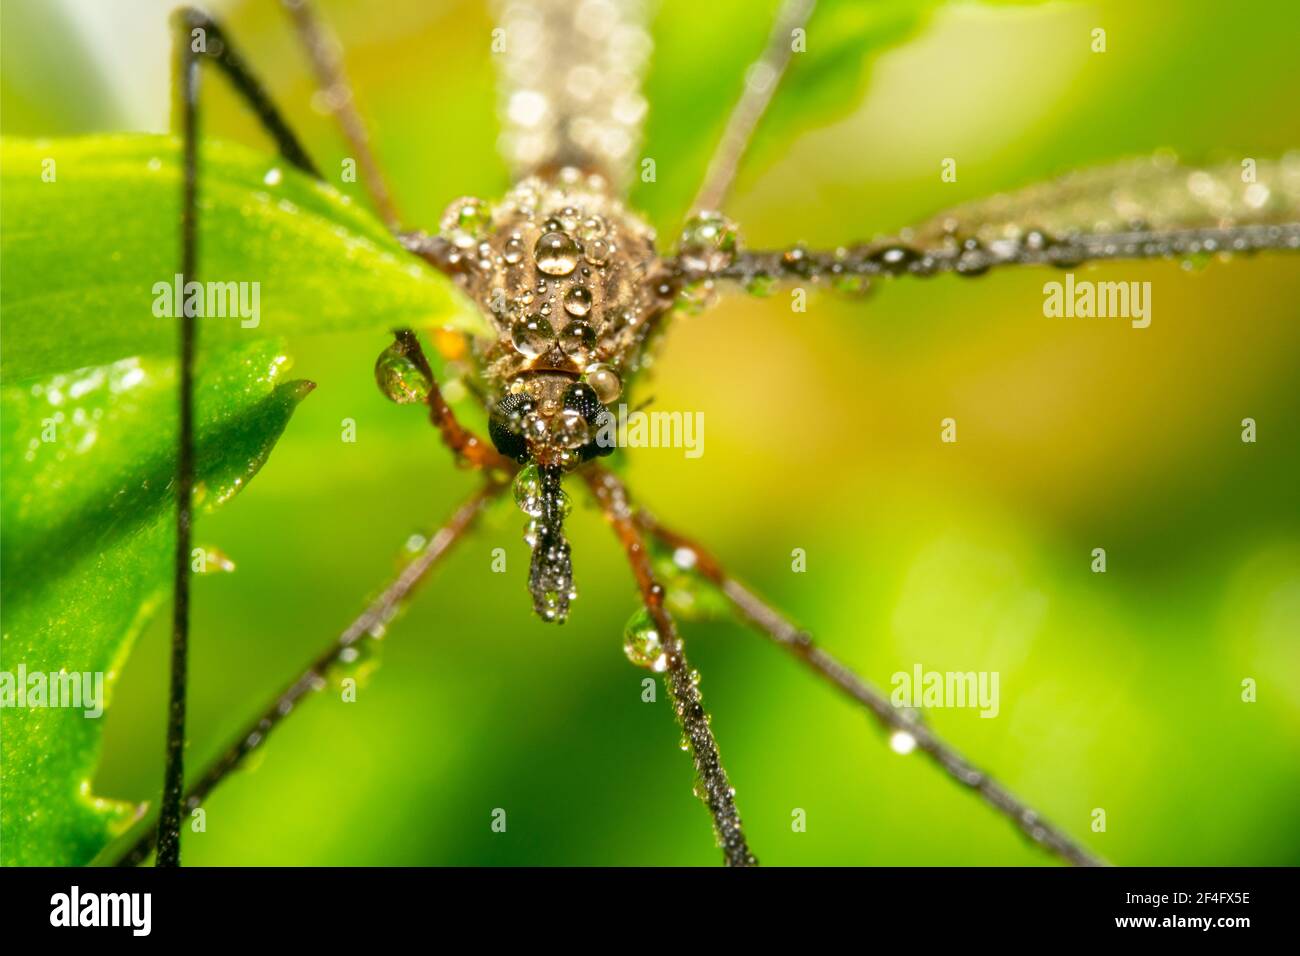 Long legged mosquito full of water dew and pointy nose Stock Photo